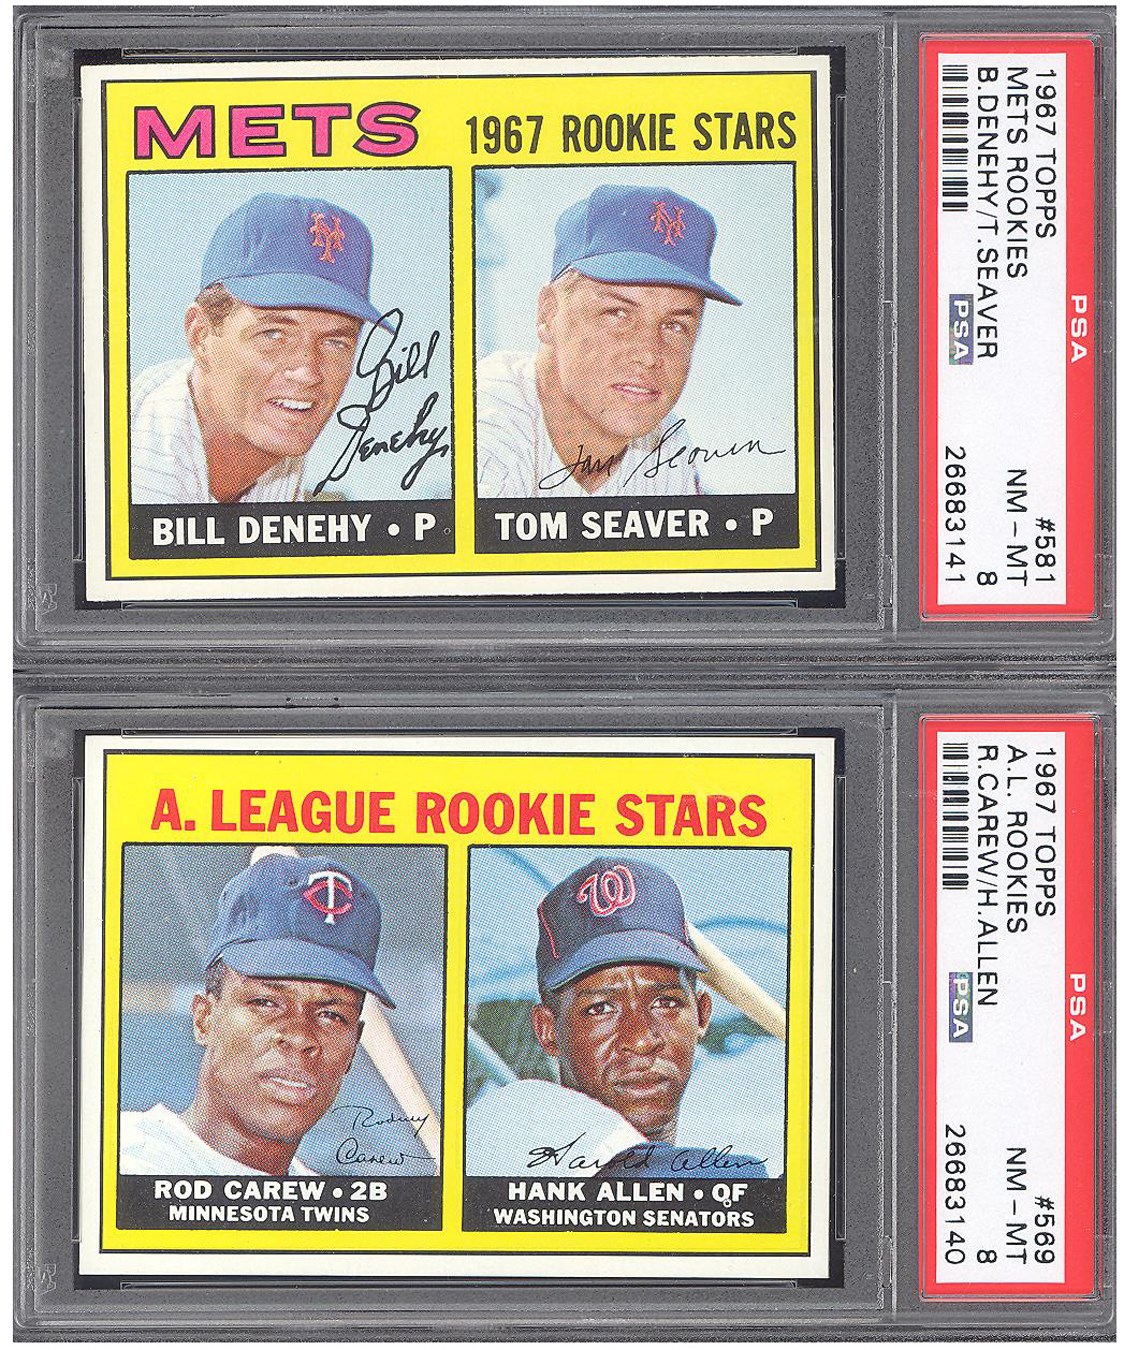 Baseball and Trading Cards - 1967 Topps Extremely High Grade Complete Set (609) with (16) PSA Graded